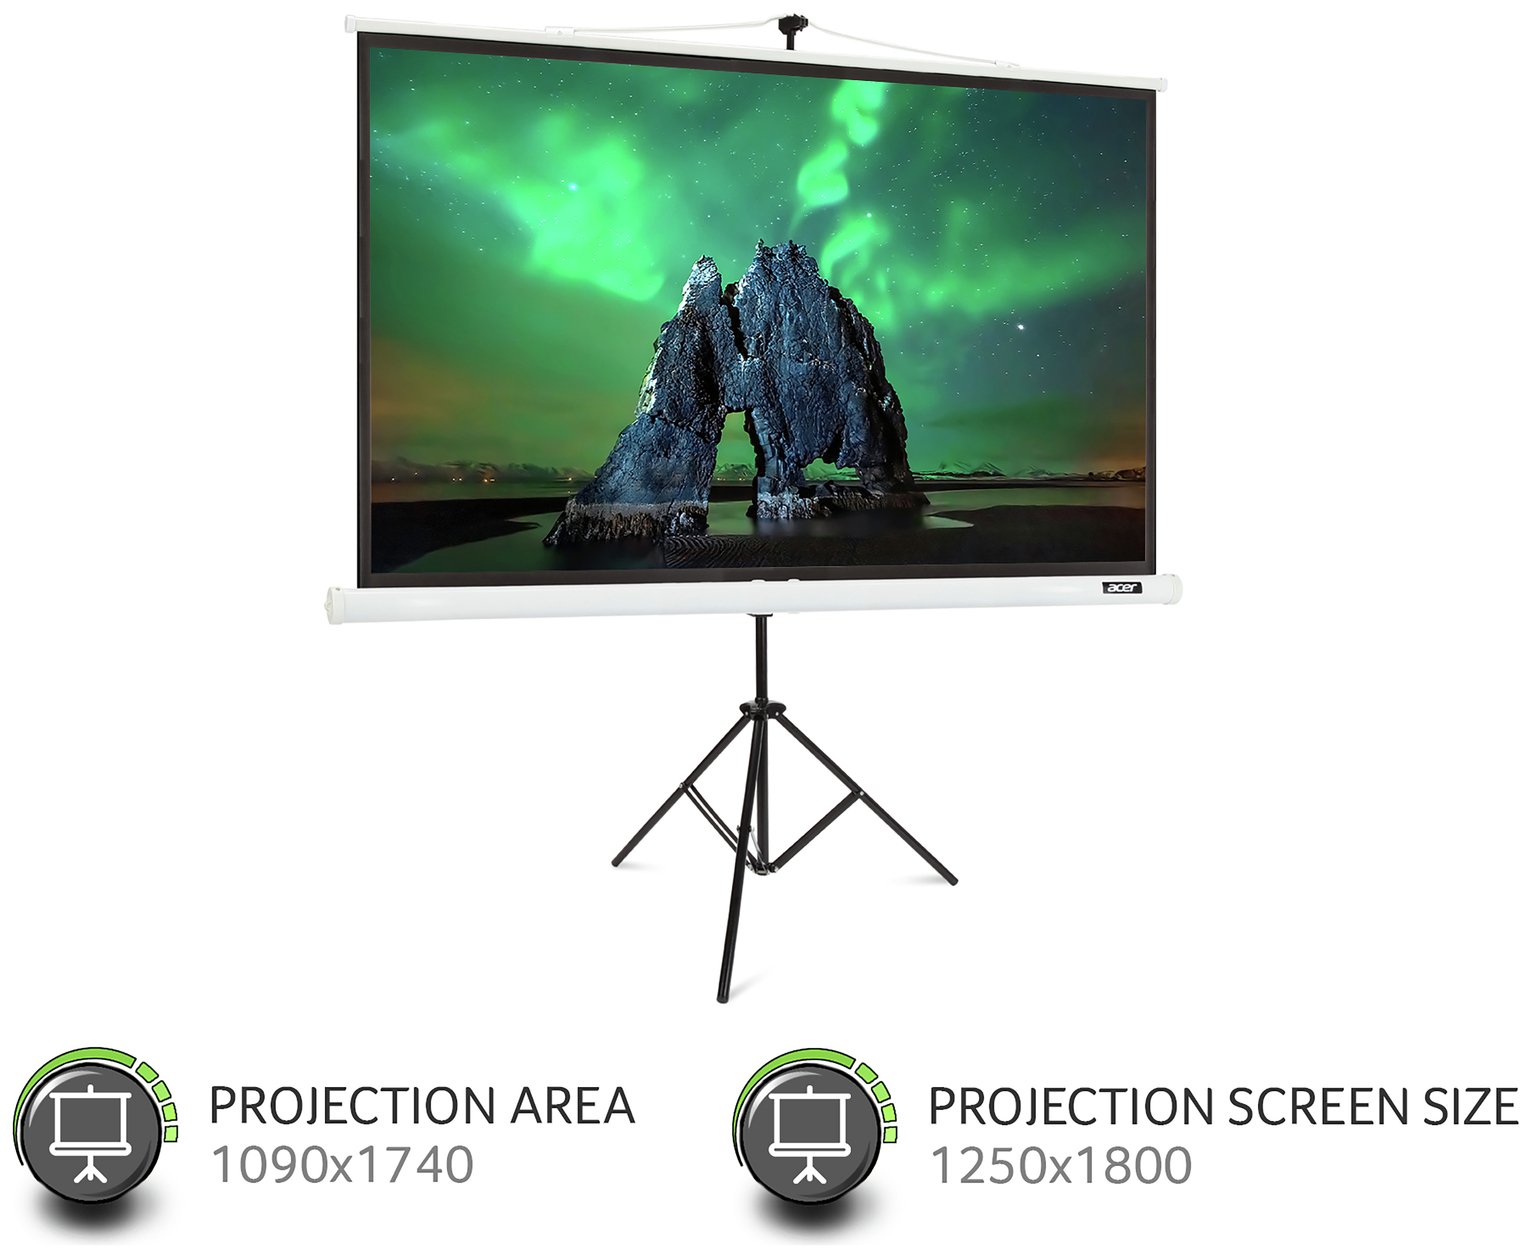 Acer 82.5 Inch Tripod Projection Screen Review